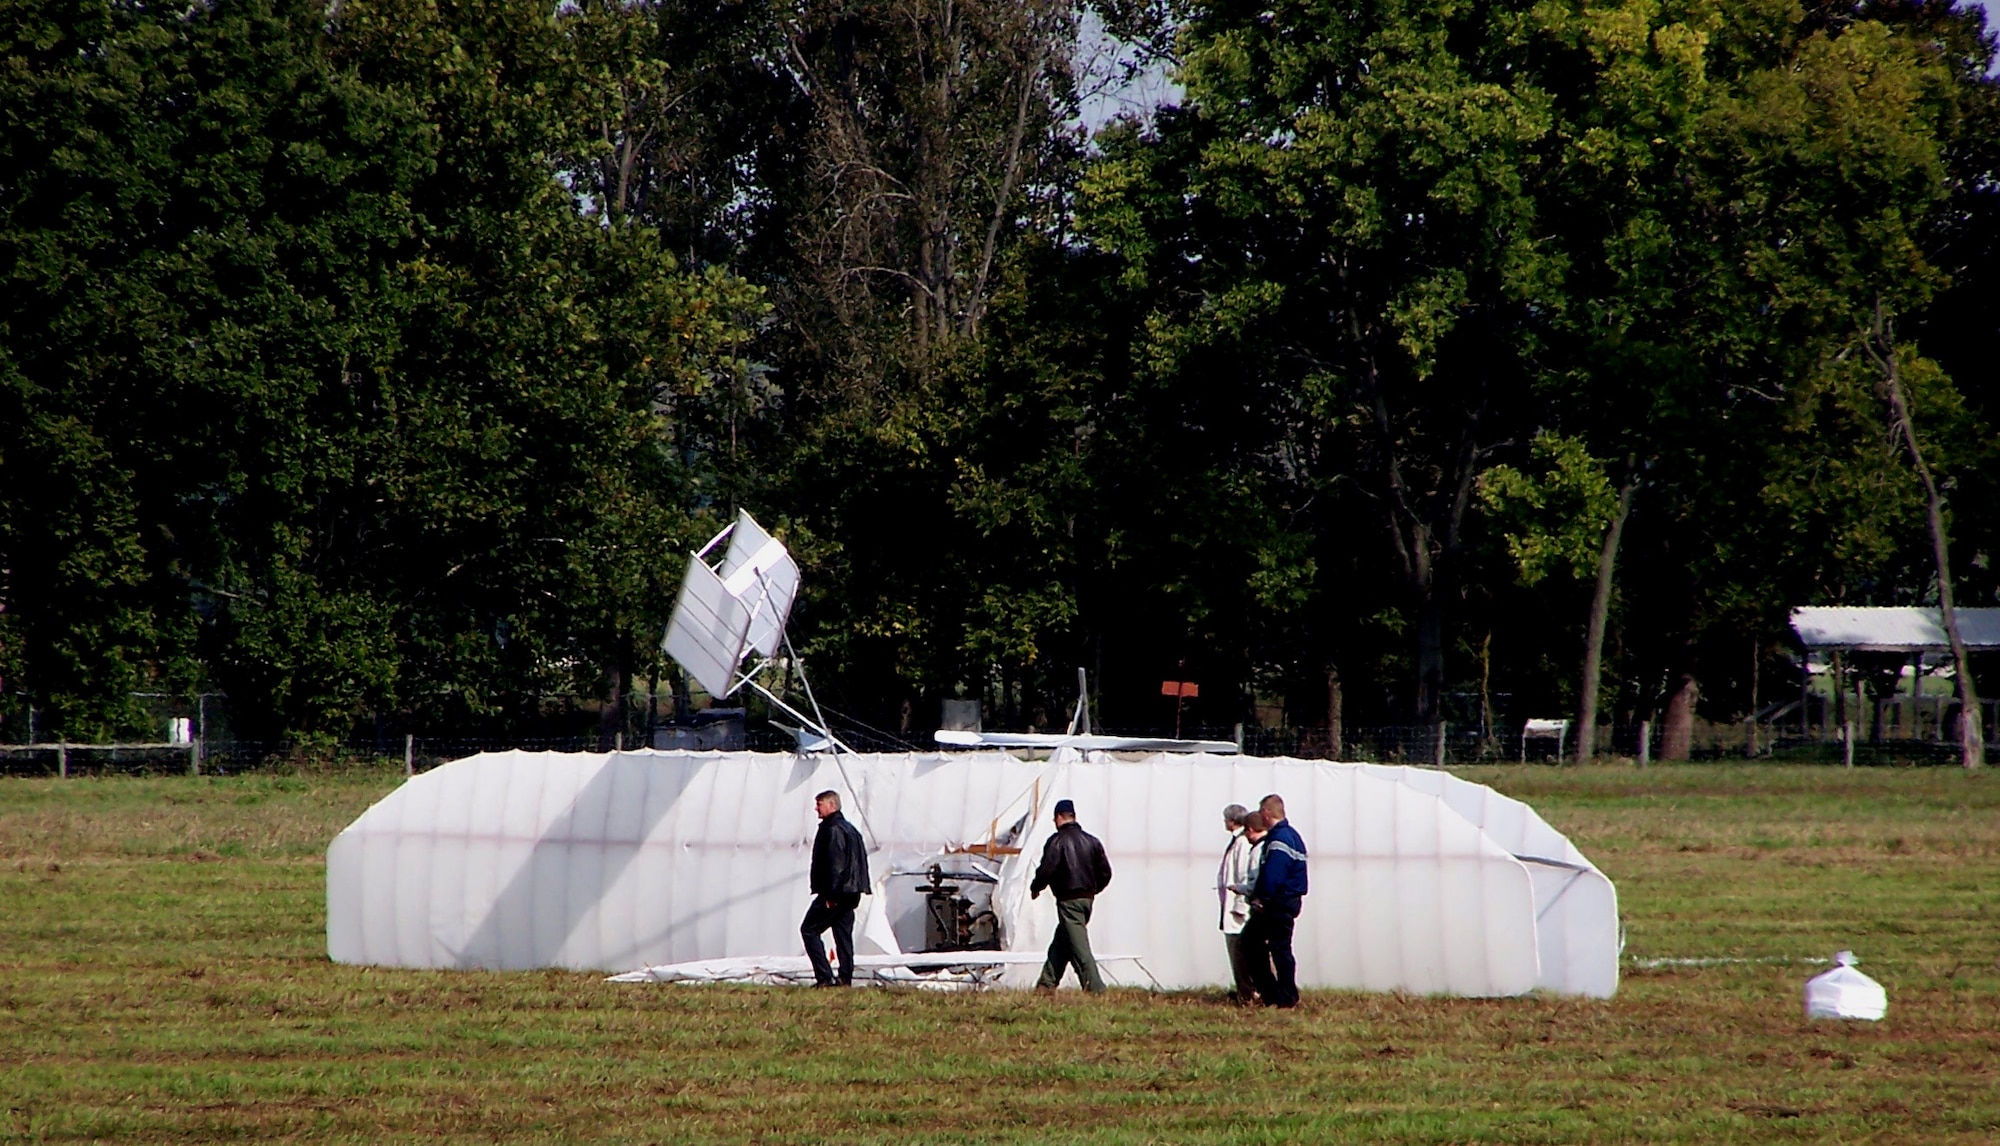 Air Force crash rescue and safety personnel inspect the wreckage of a replica 1905 Wright Flyer III that crashed Oct. 1, 2009 on Huffman Prairie Flying Field at Wright-Patterson Air Force Base, Ohio. Pilot and vintage aircraft builder Mark Dusenberry of Dennison, Ohio, was injured during the practice flight in preparation to celebrate the 104th Anniversary of Practical Flight. (U.S. Air Force photo/Ted Theopolos) 